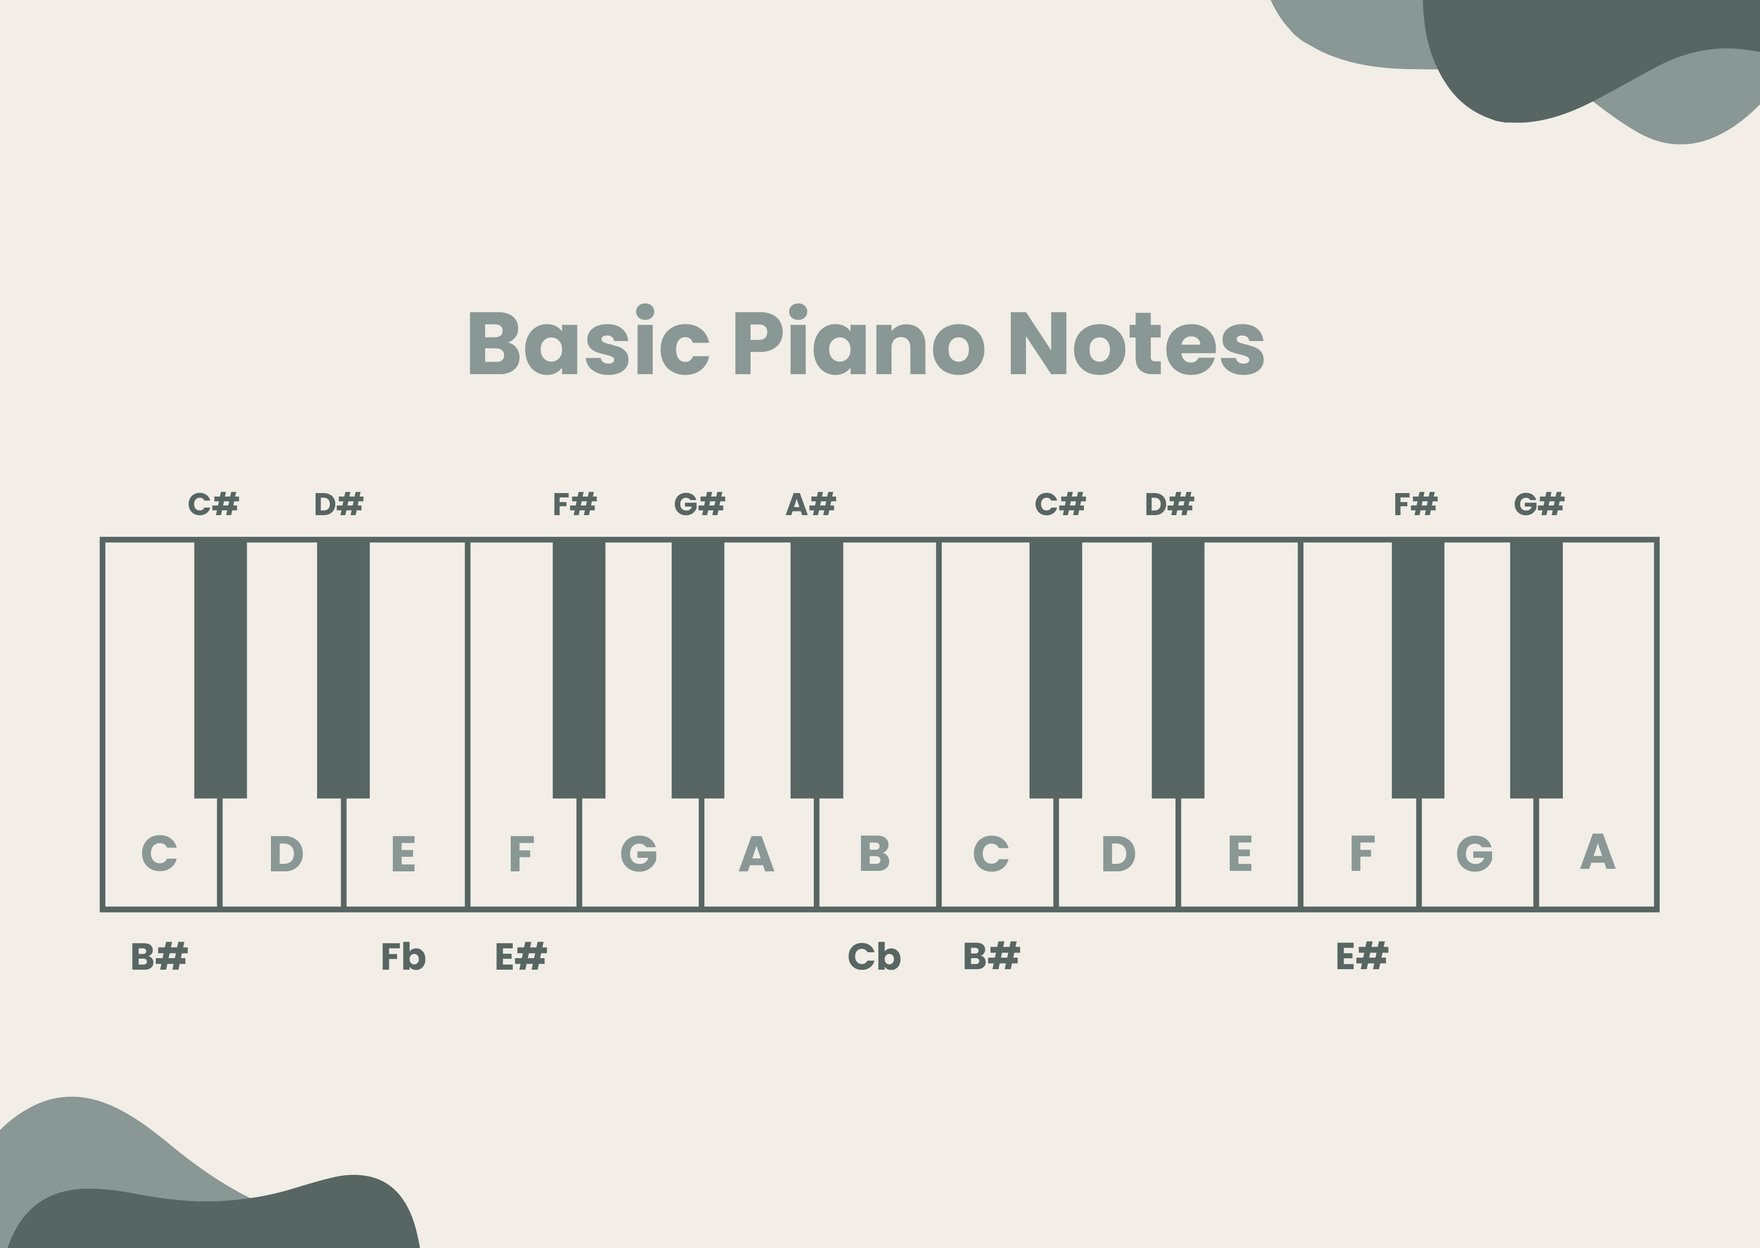 Basic Piano Notes Chart in PDF, Illustrator